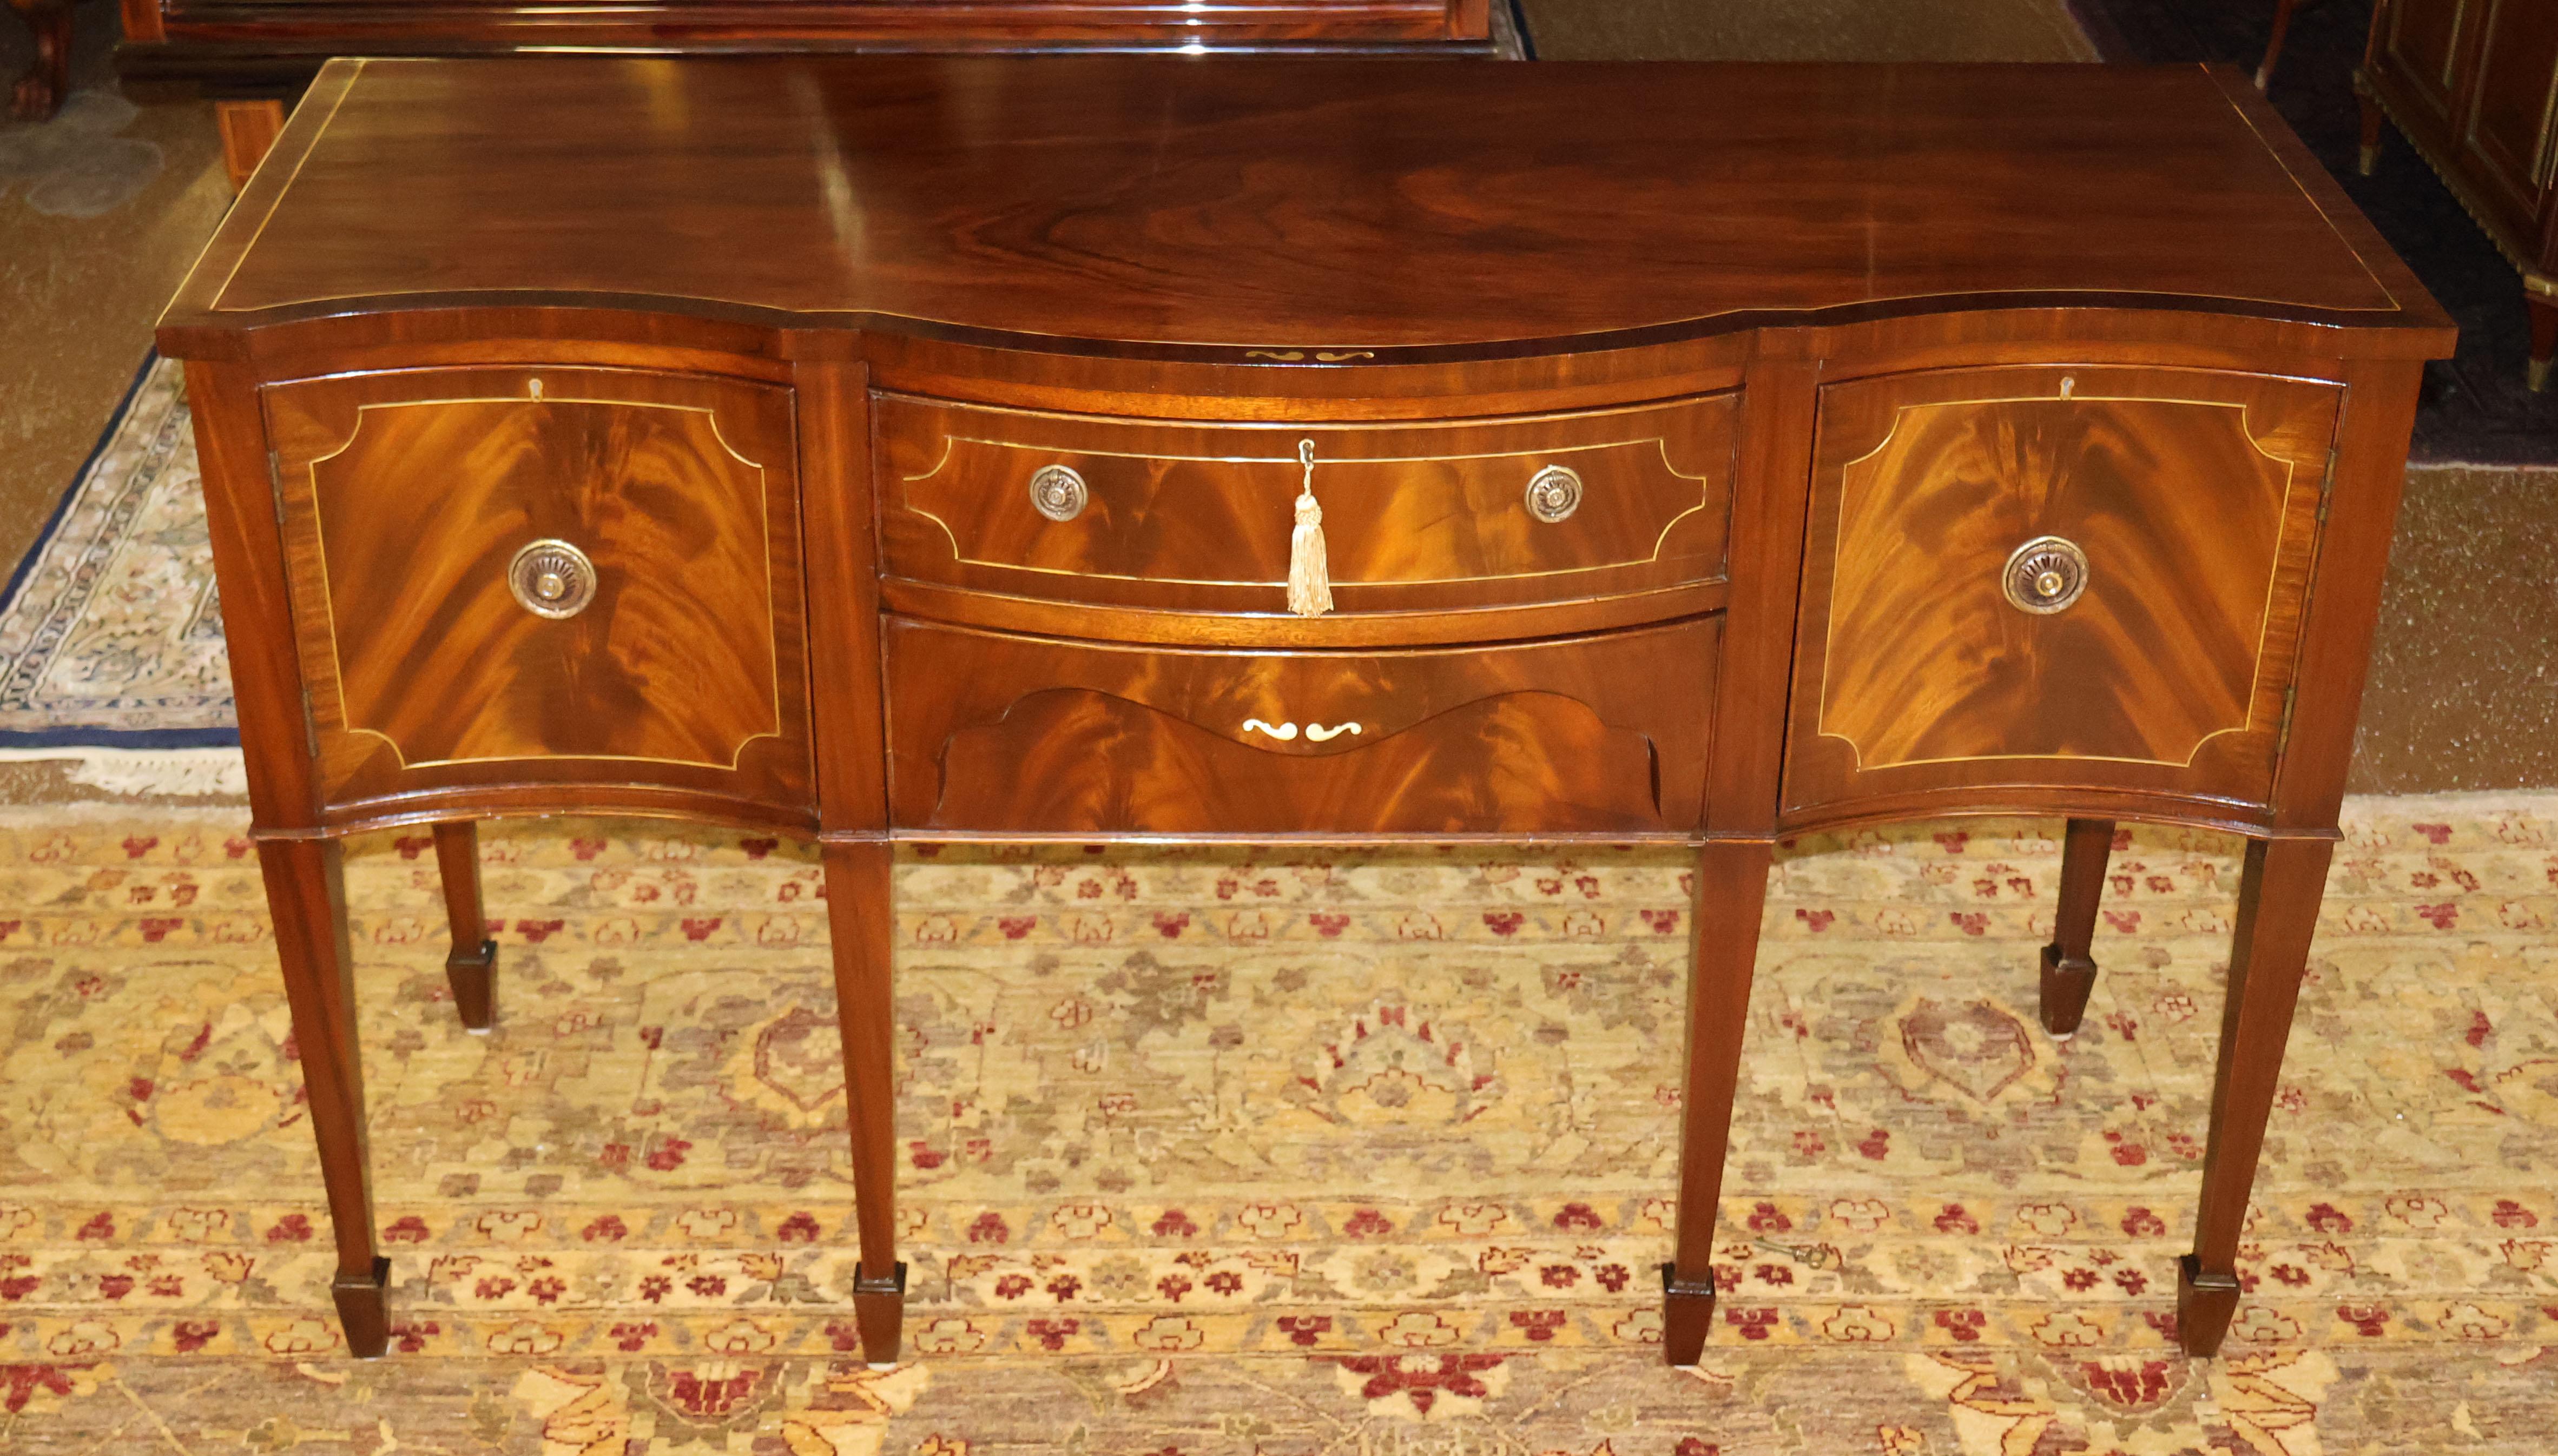 ​Early 20th Century Flame Mahogany Federal Style Huntboard Sideboard Server

Dimensions : 60.25